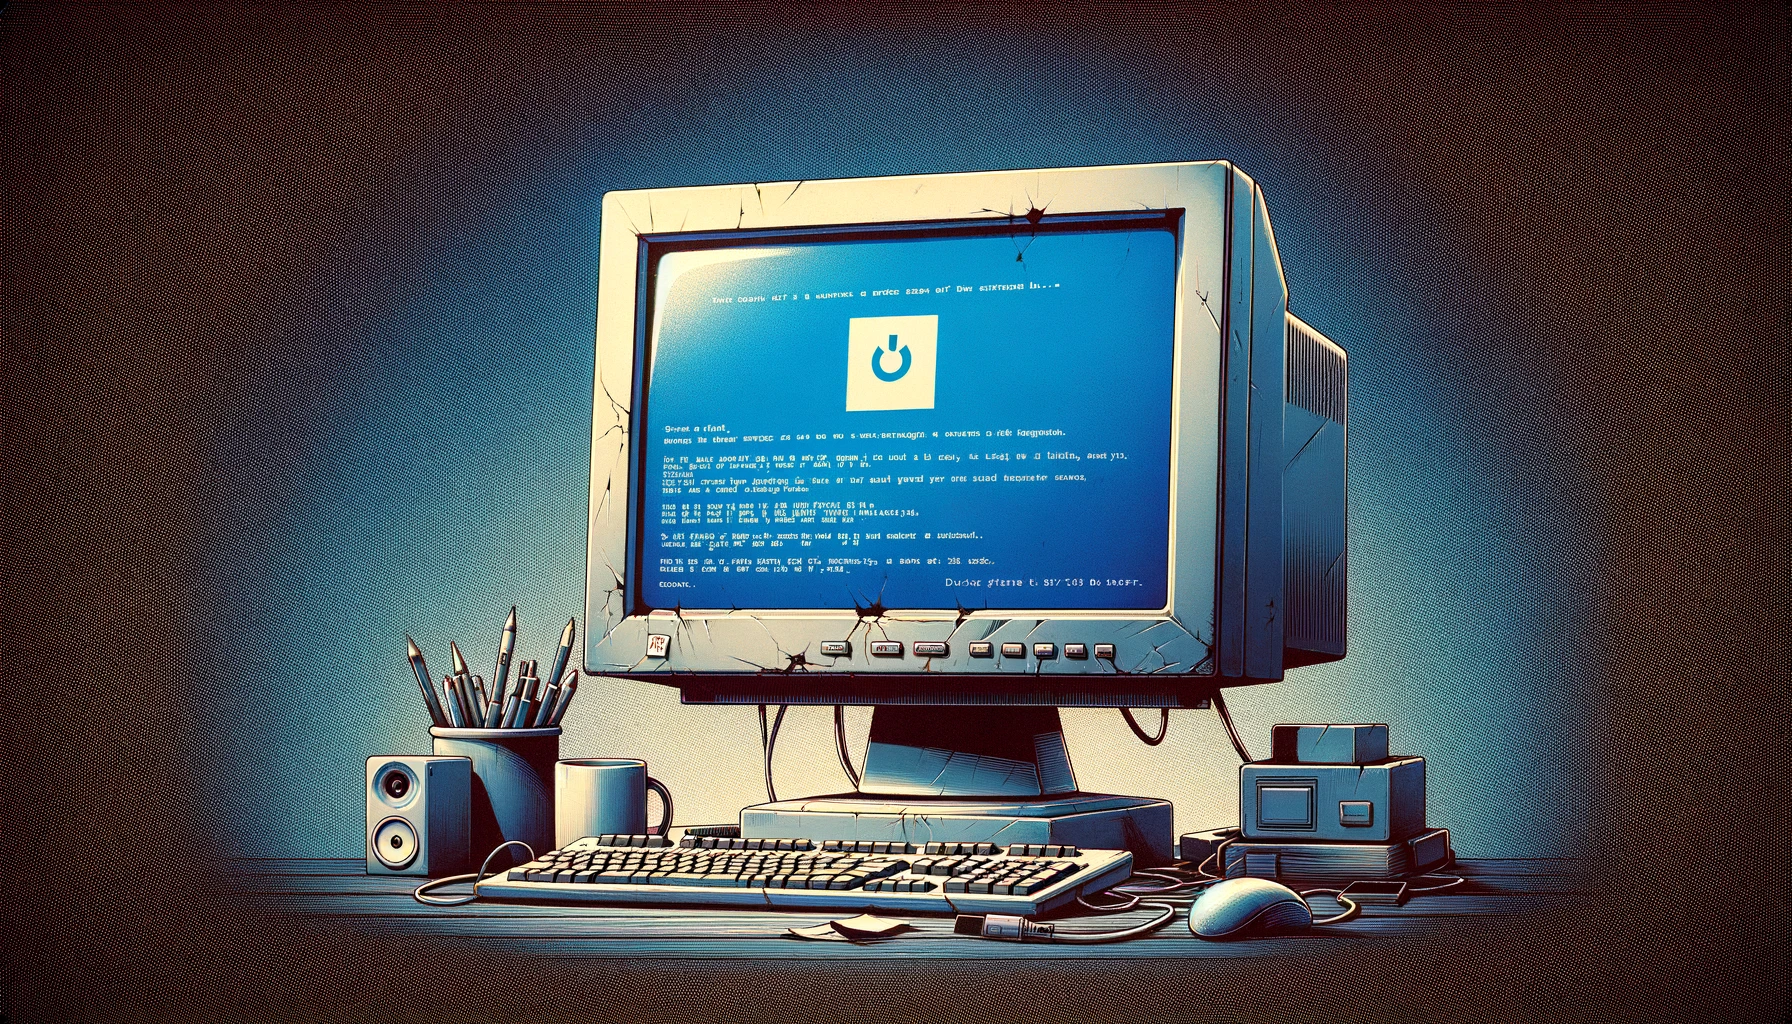 The image designed showcases a generic computer monitor with a blue screen, symbolizing a system crash or error, set in a typical workspace environment to evoke the challenges of dealing with computer errors.